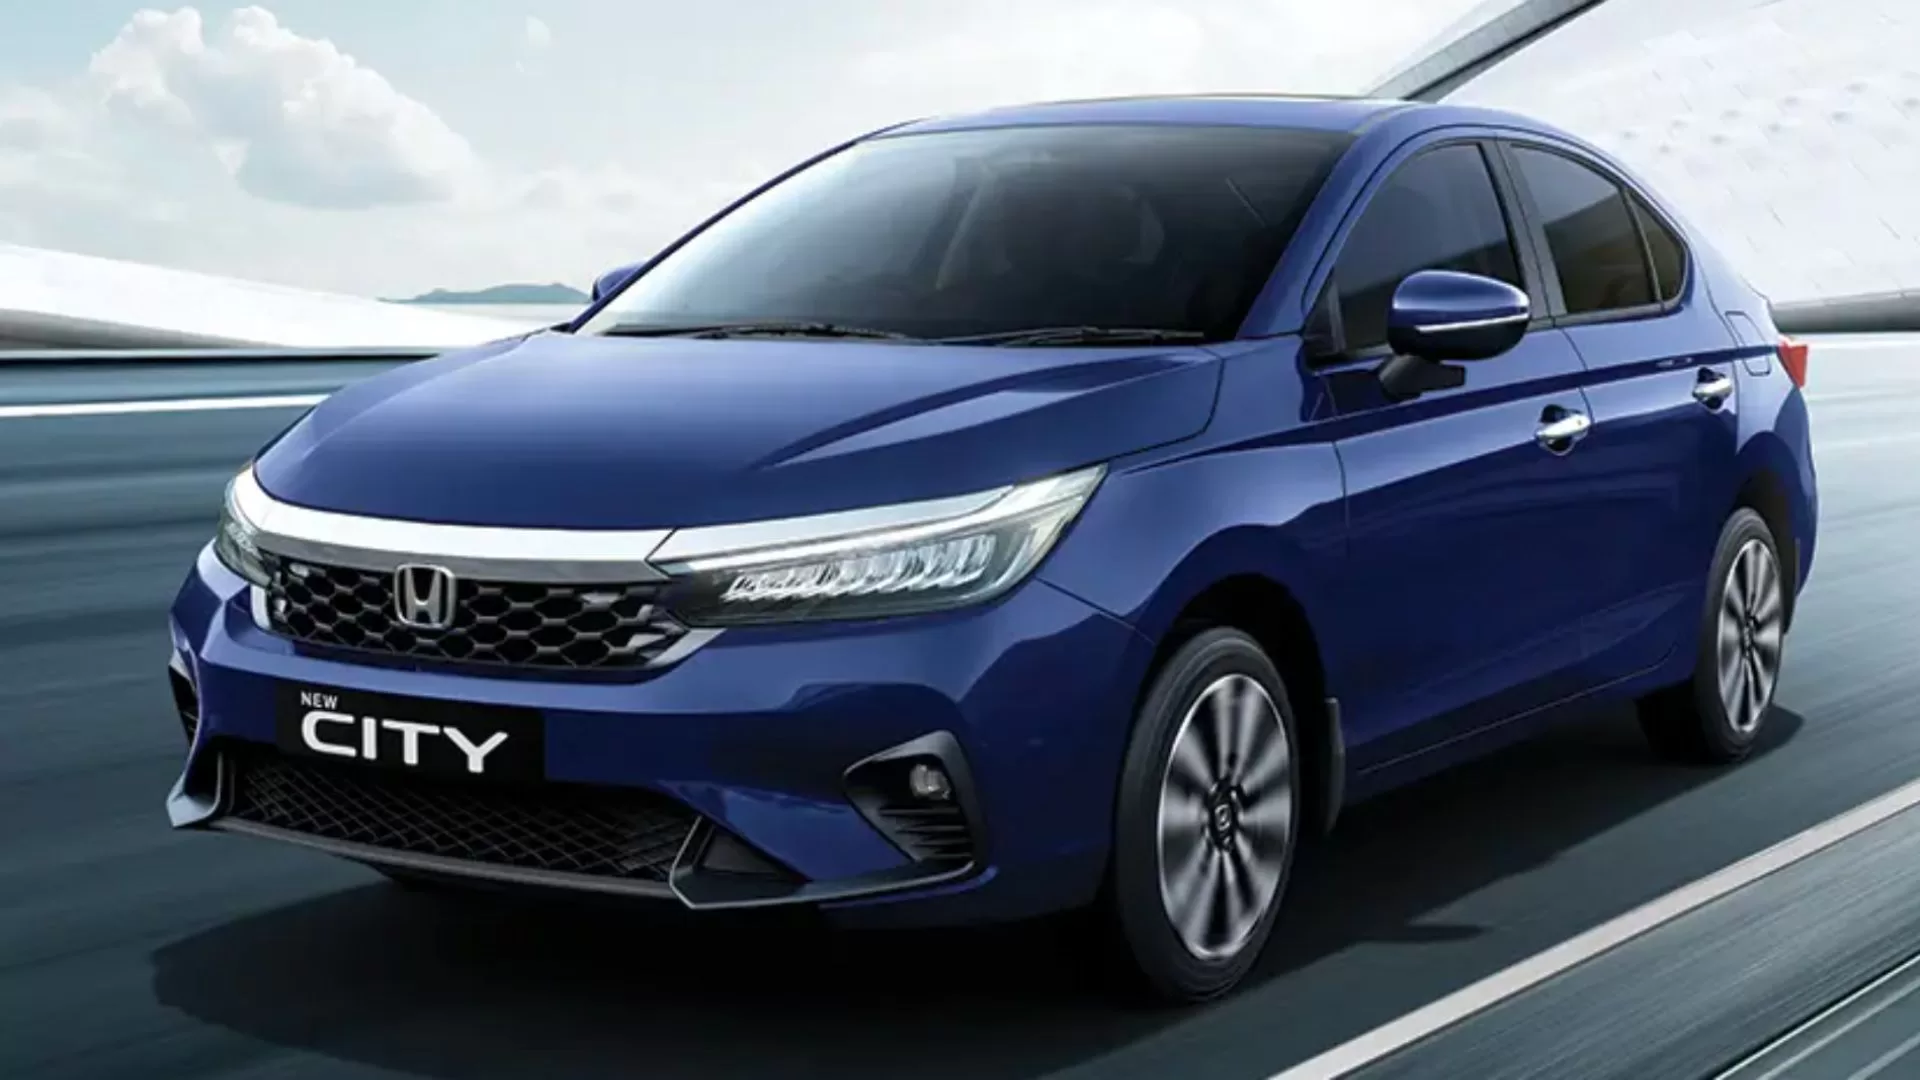 2023 Honda City has been facelifted and given more features, when will PH get it?